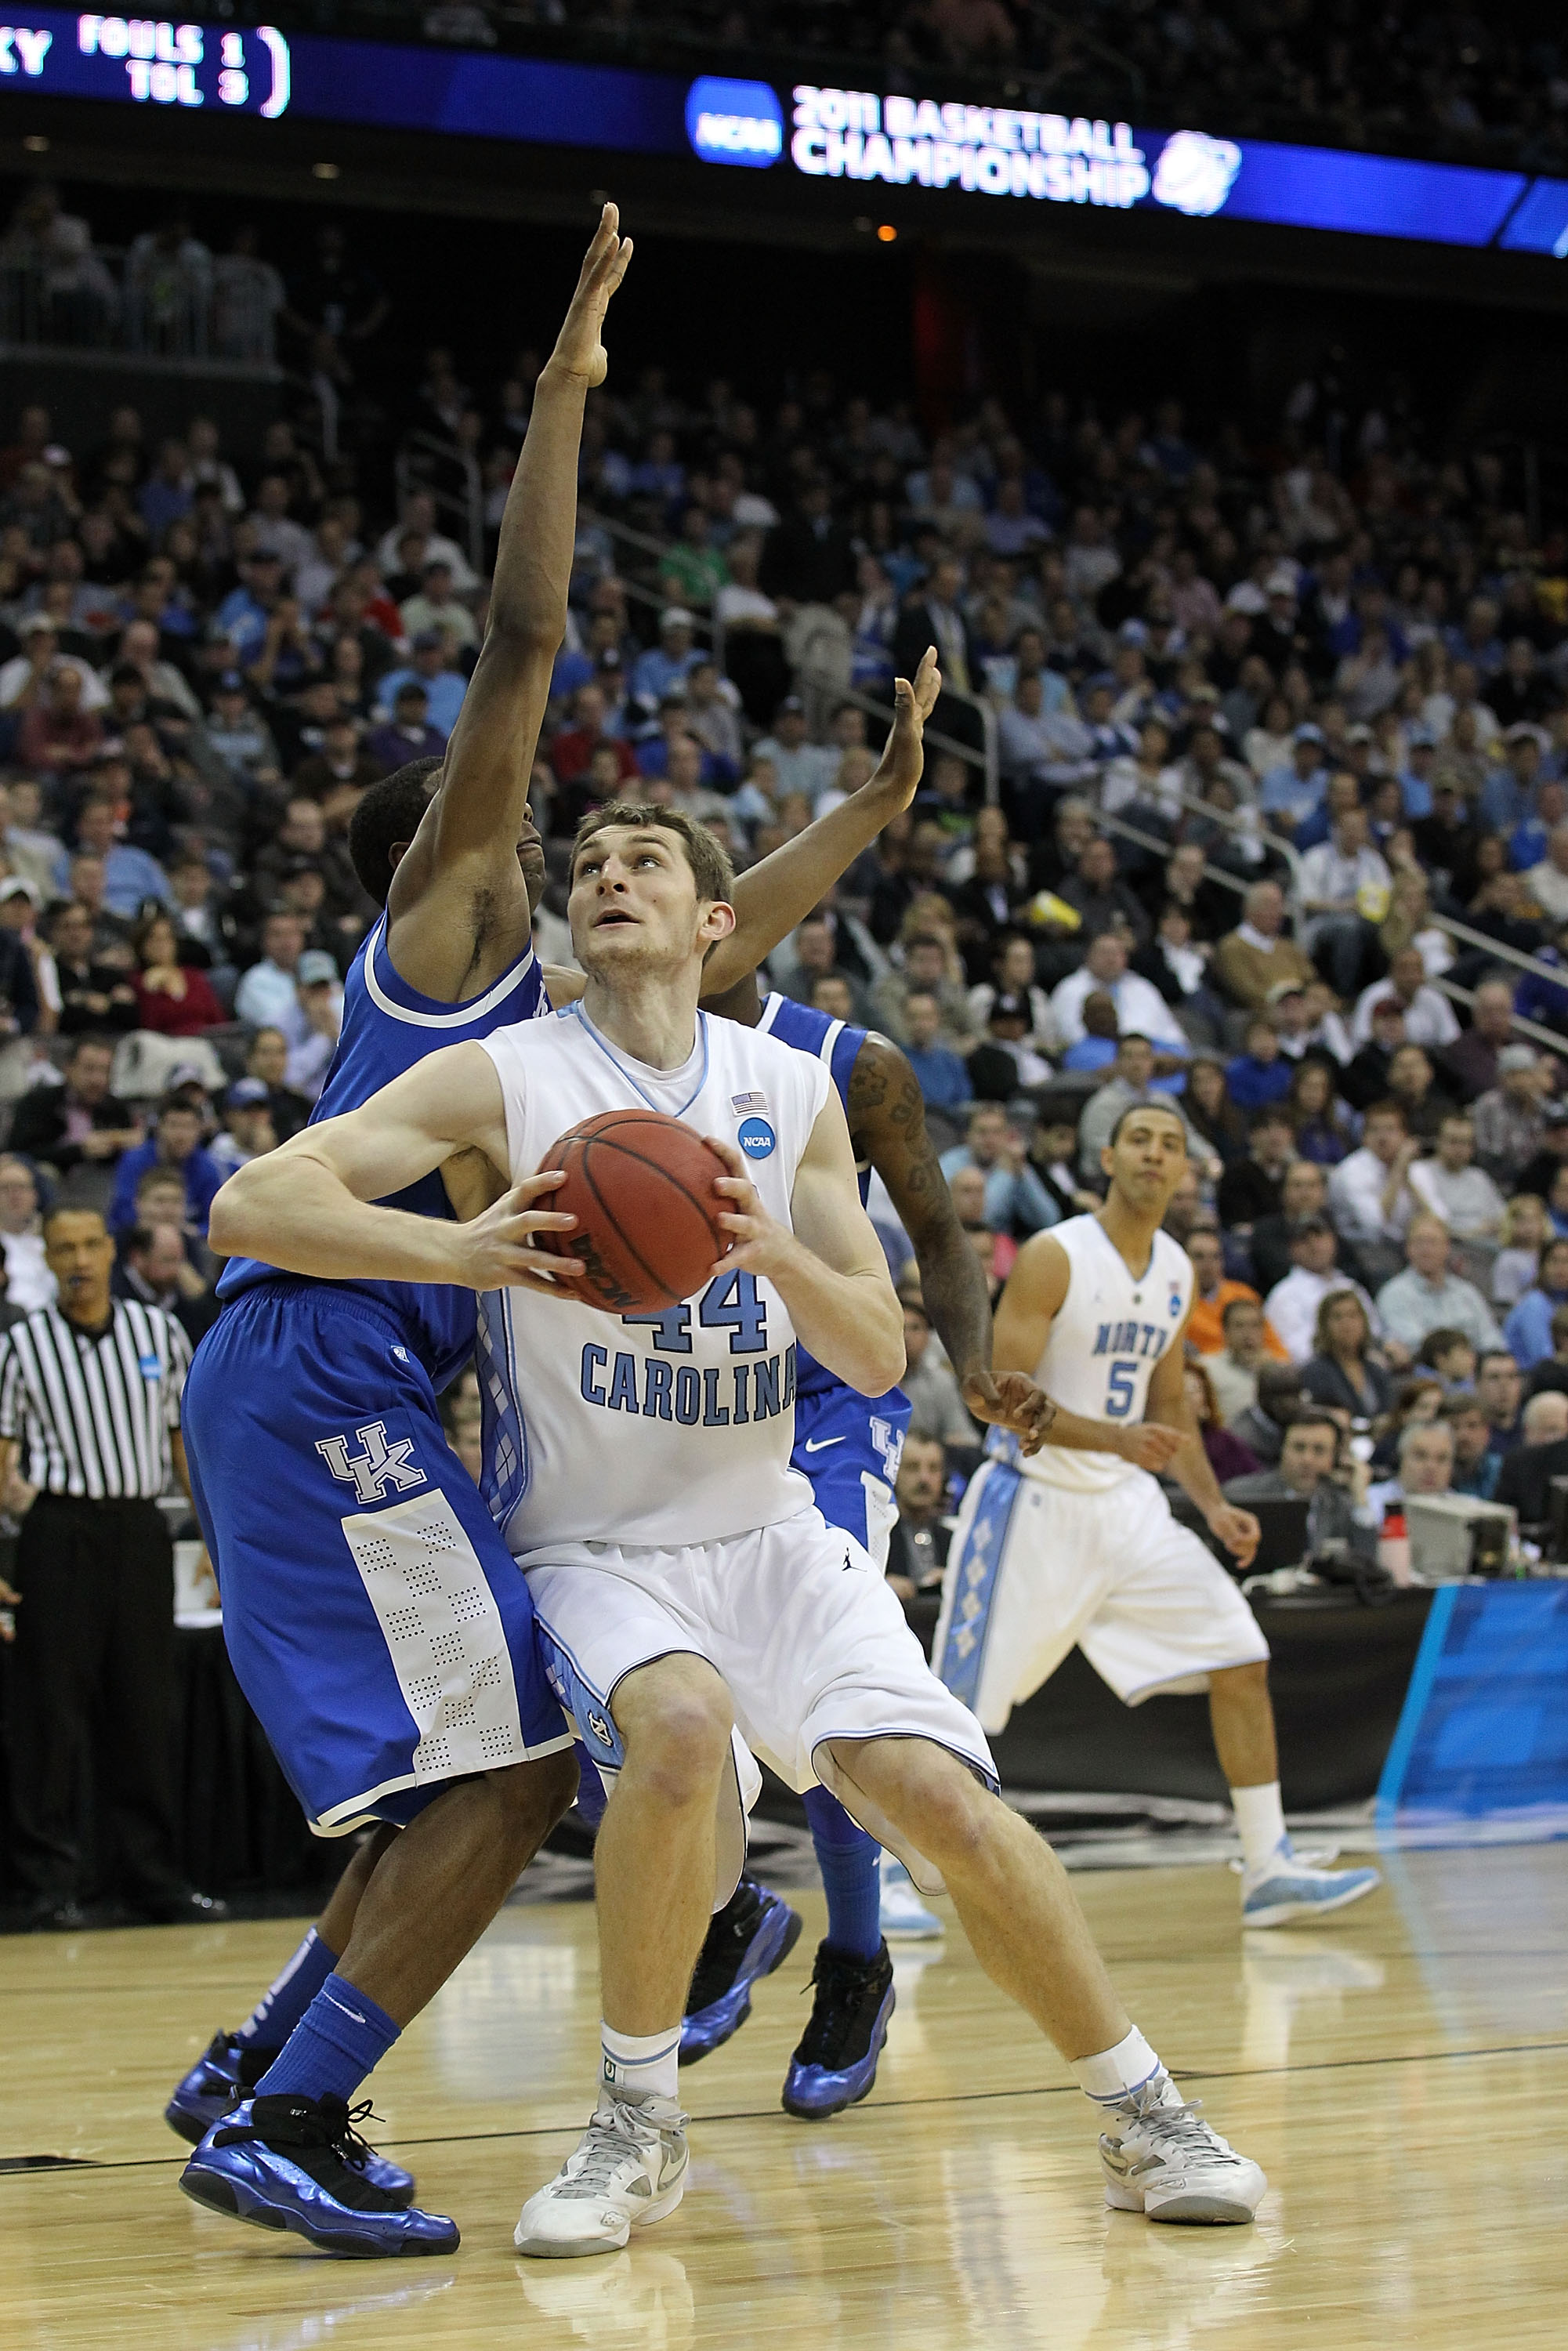 NEWARK, NJ - MARCH 27:  Tyler Zeller #44 of the North Carolina Tar Heels in action against Terrence Jones #3 of the Kentucky Wildcats during the east regional final of the 2011 NCAA men's basketball tournament at Prudential Center on March 27, 2011 in New